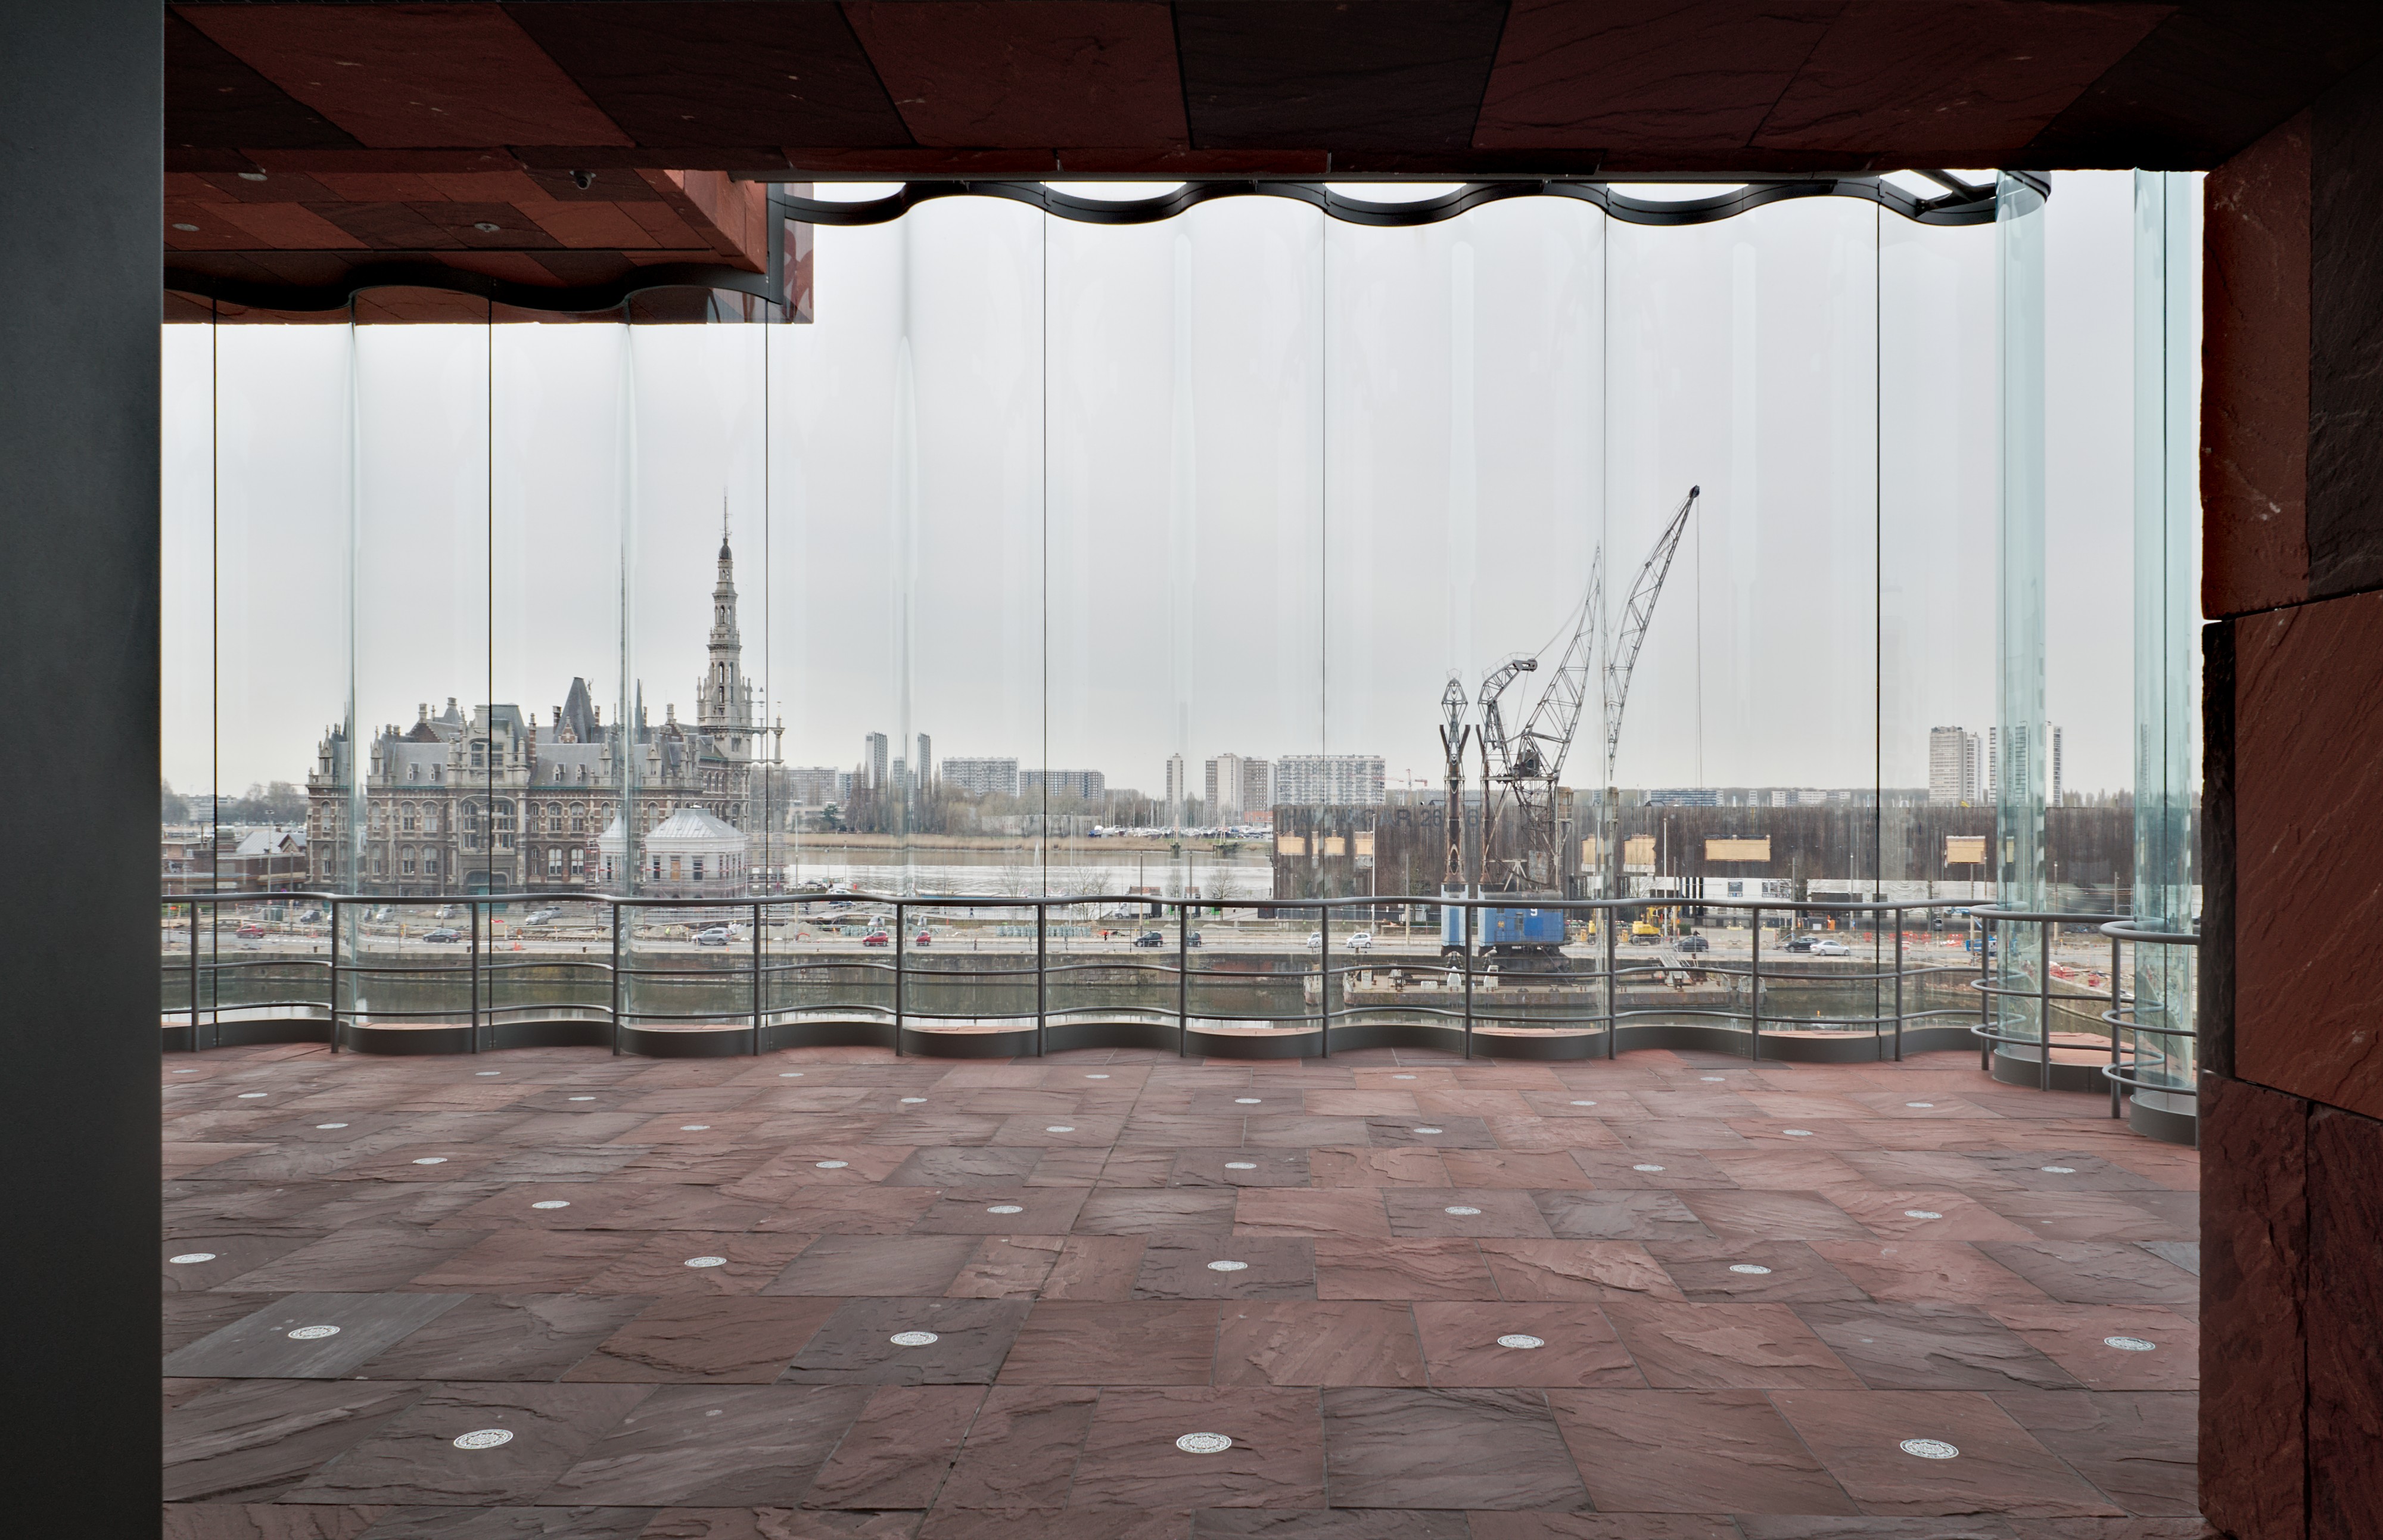 Curved glass as seen from inside the MAS museum (Antwerp, BE)